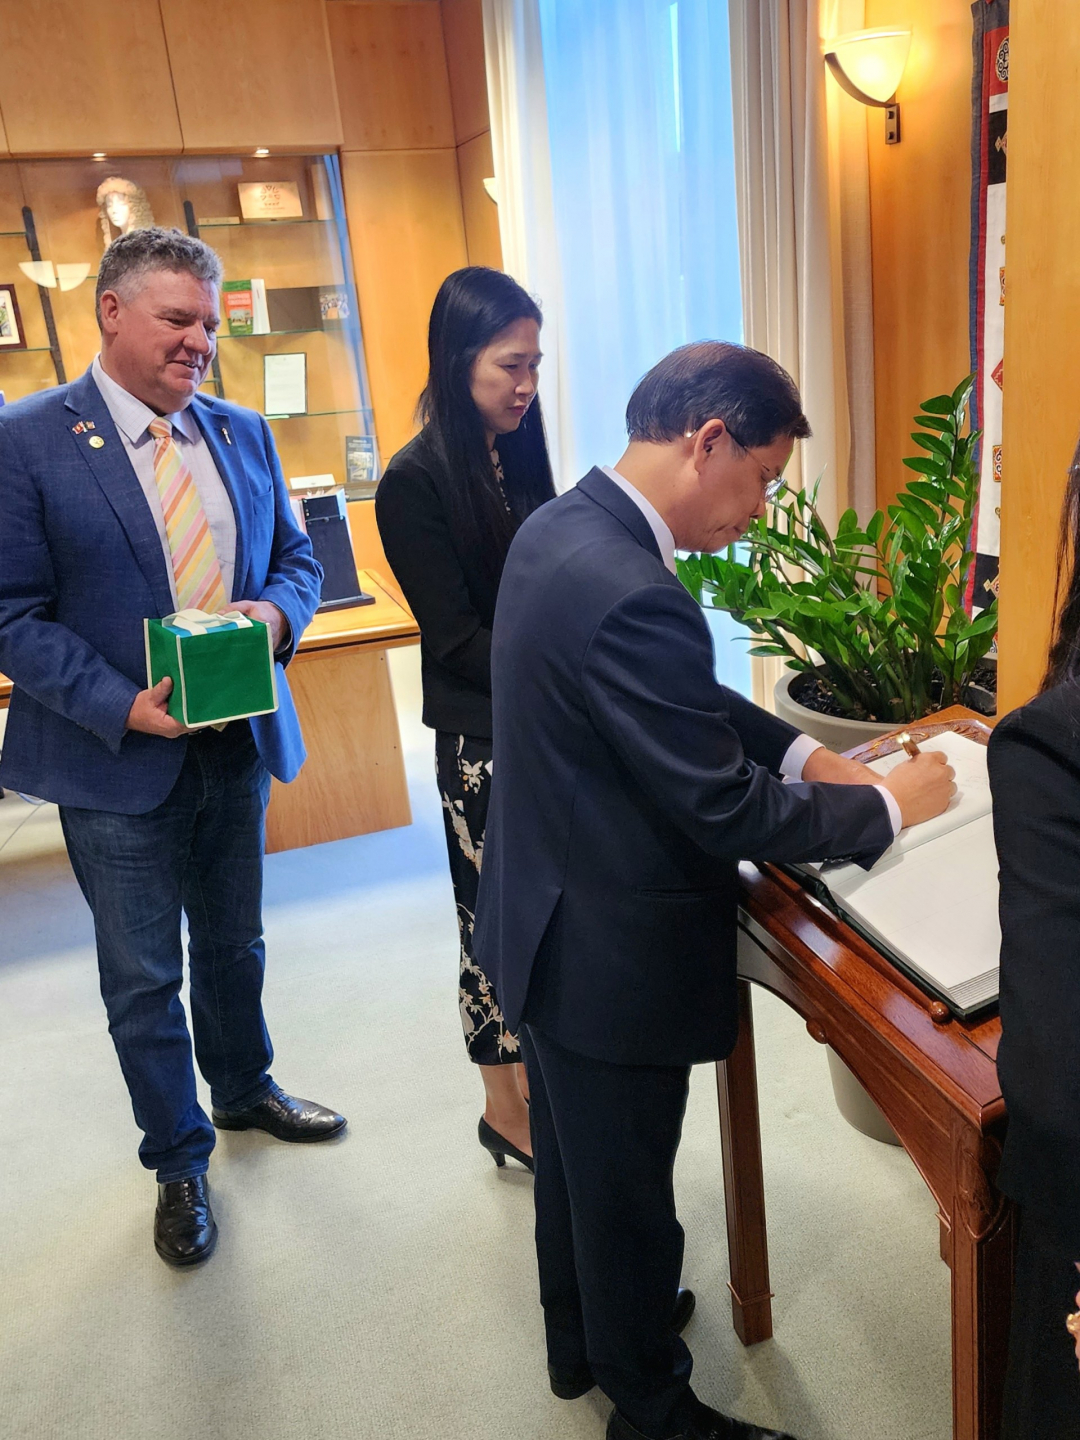 Chairman of the Provincial People's Committee Nguyen Tan Tuan signed the Guest Book at the Parliament House of the Northern Territory, Australia.